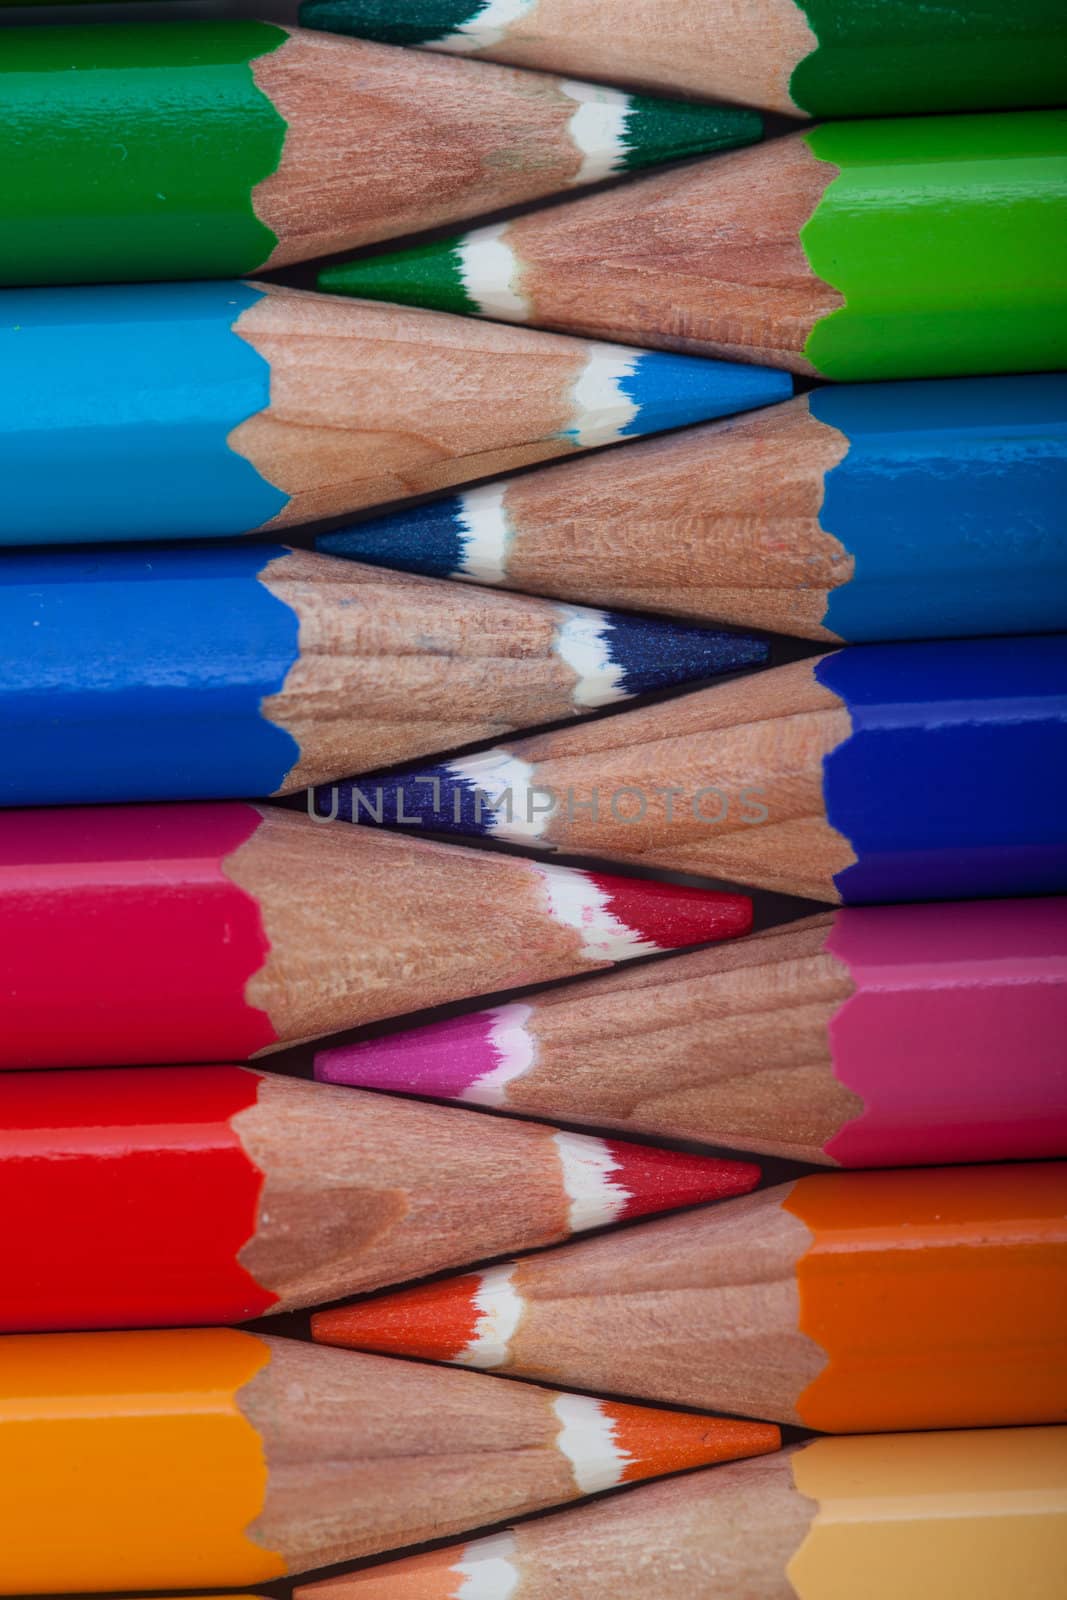 A vivid image with intersected colored pencils such as yellow, orange, red, pink and blue.